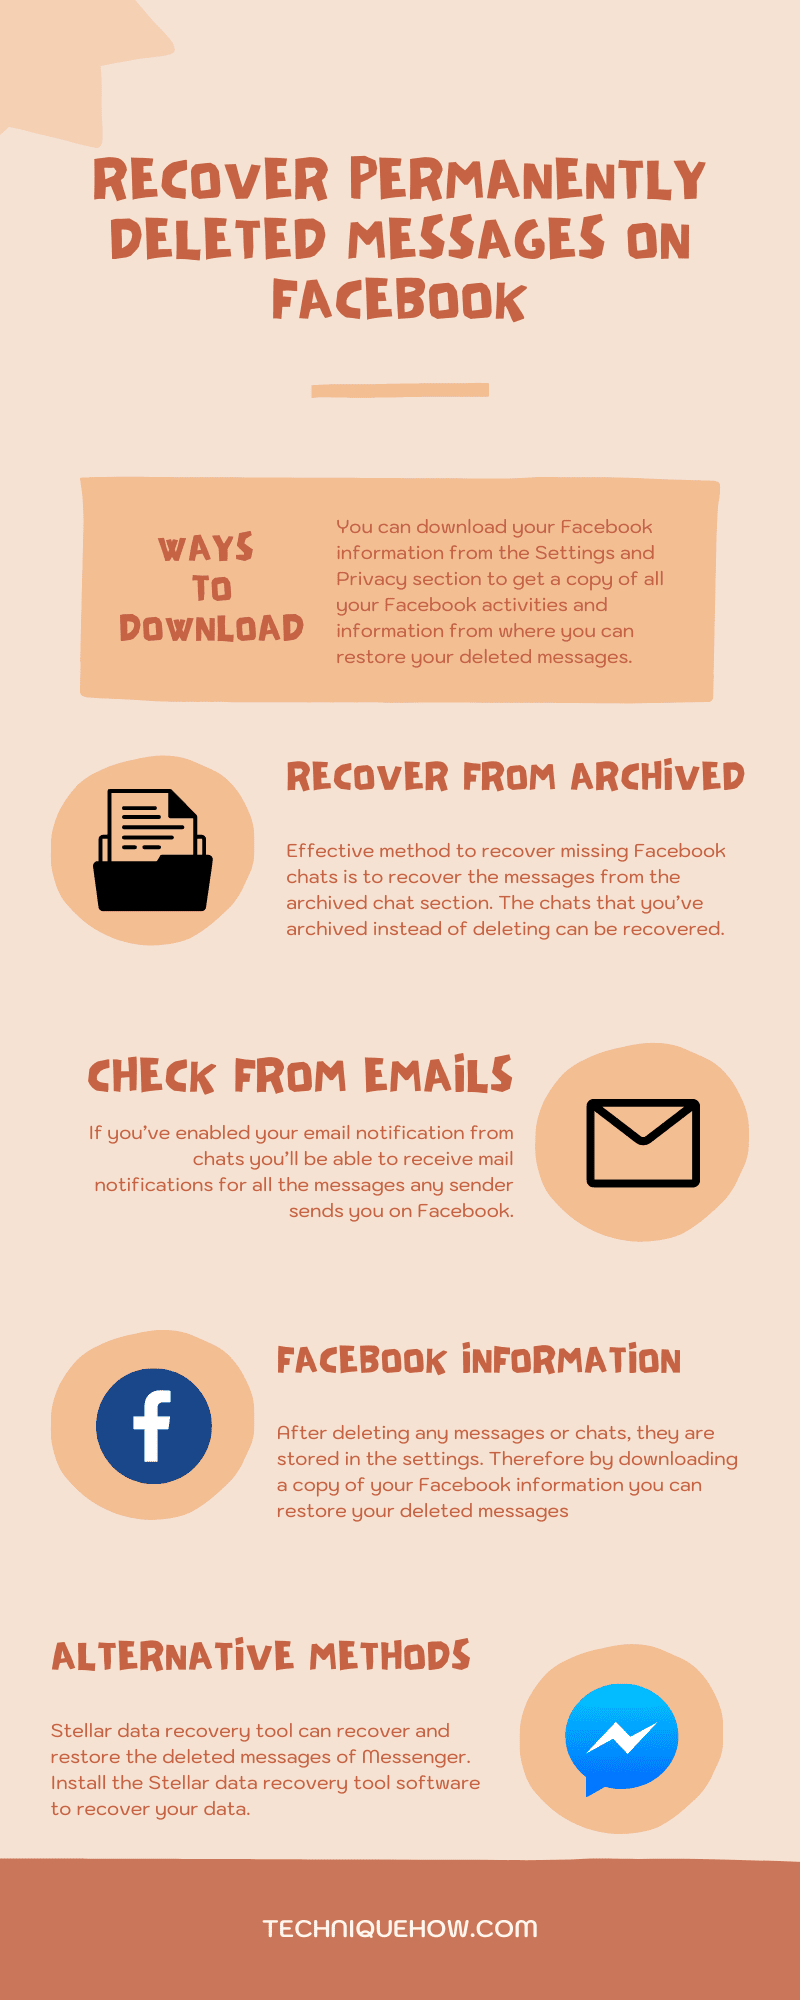 Infographic_Recover Permanently deleted messages on Facebook